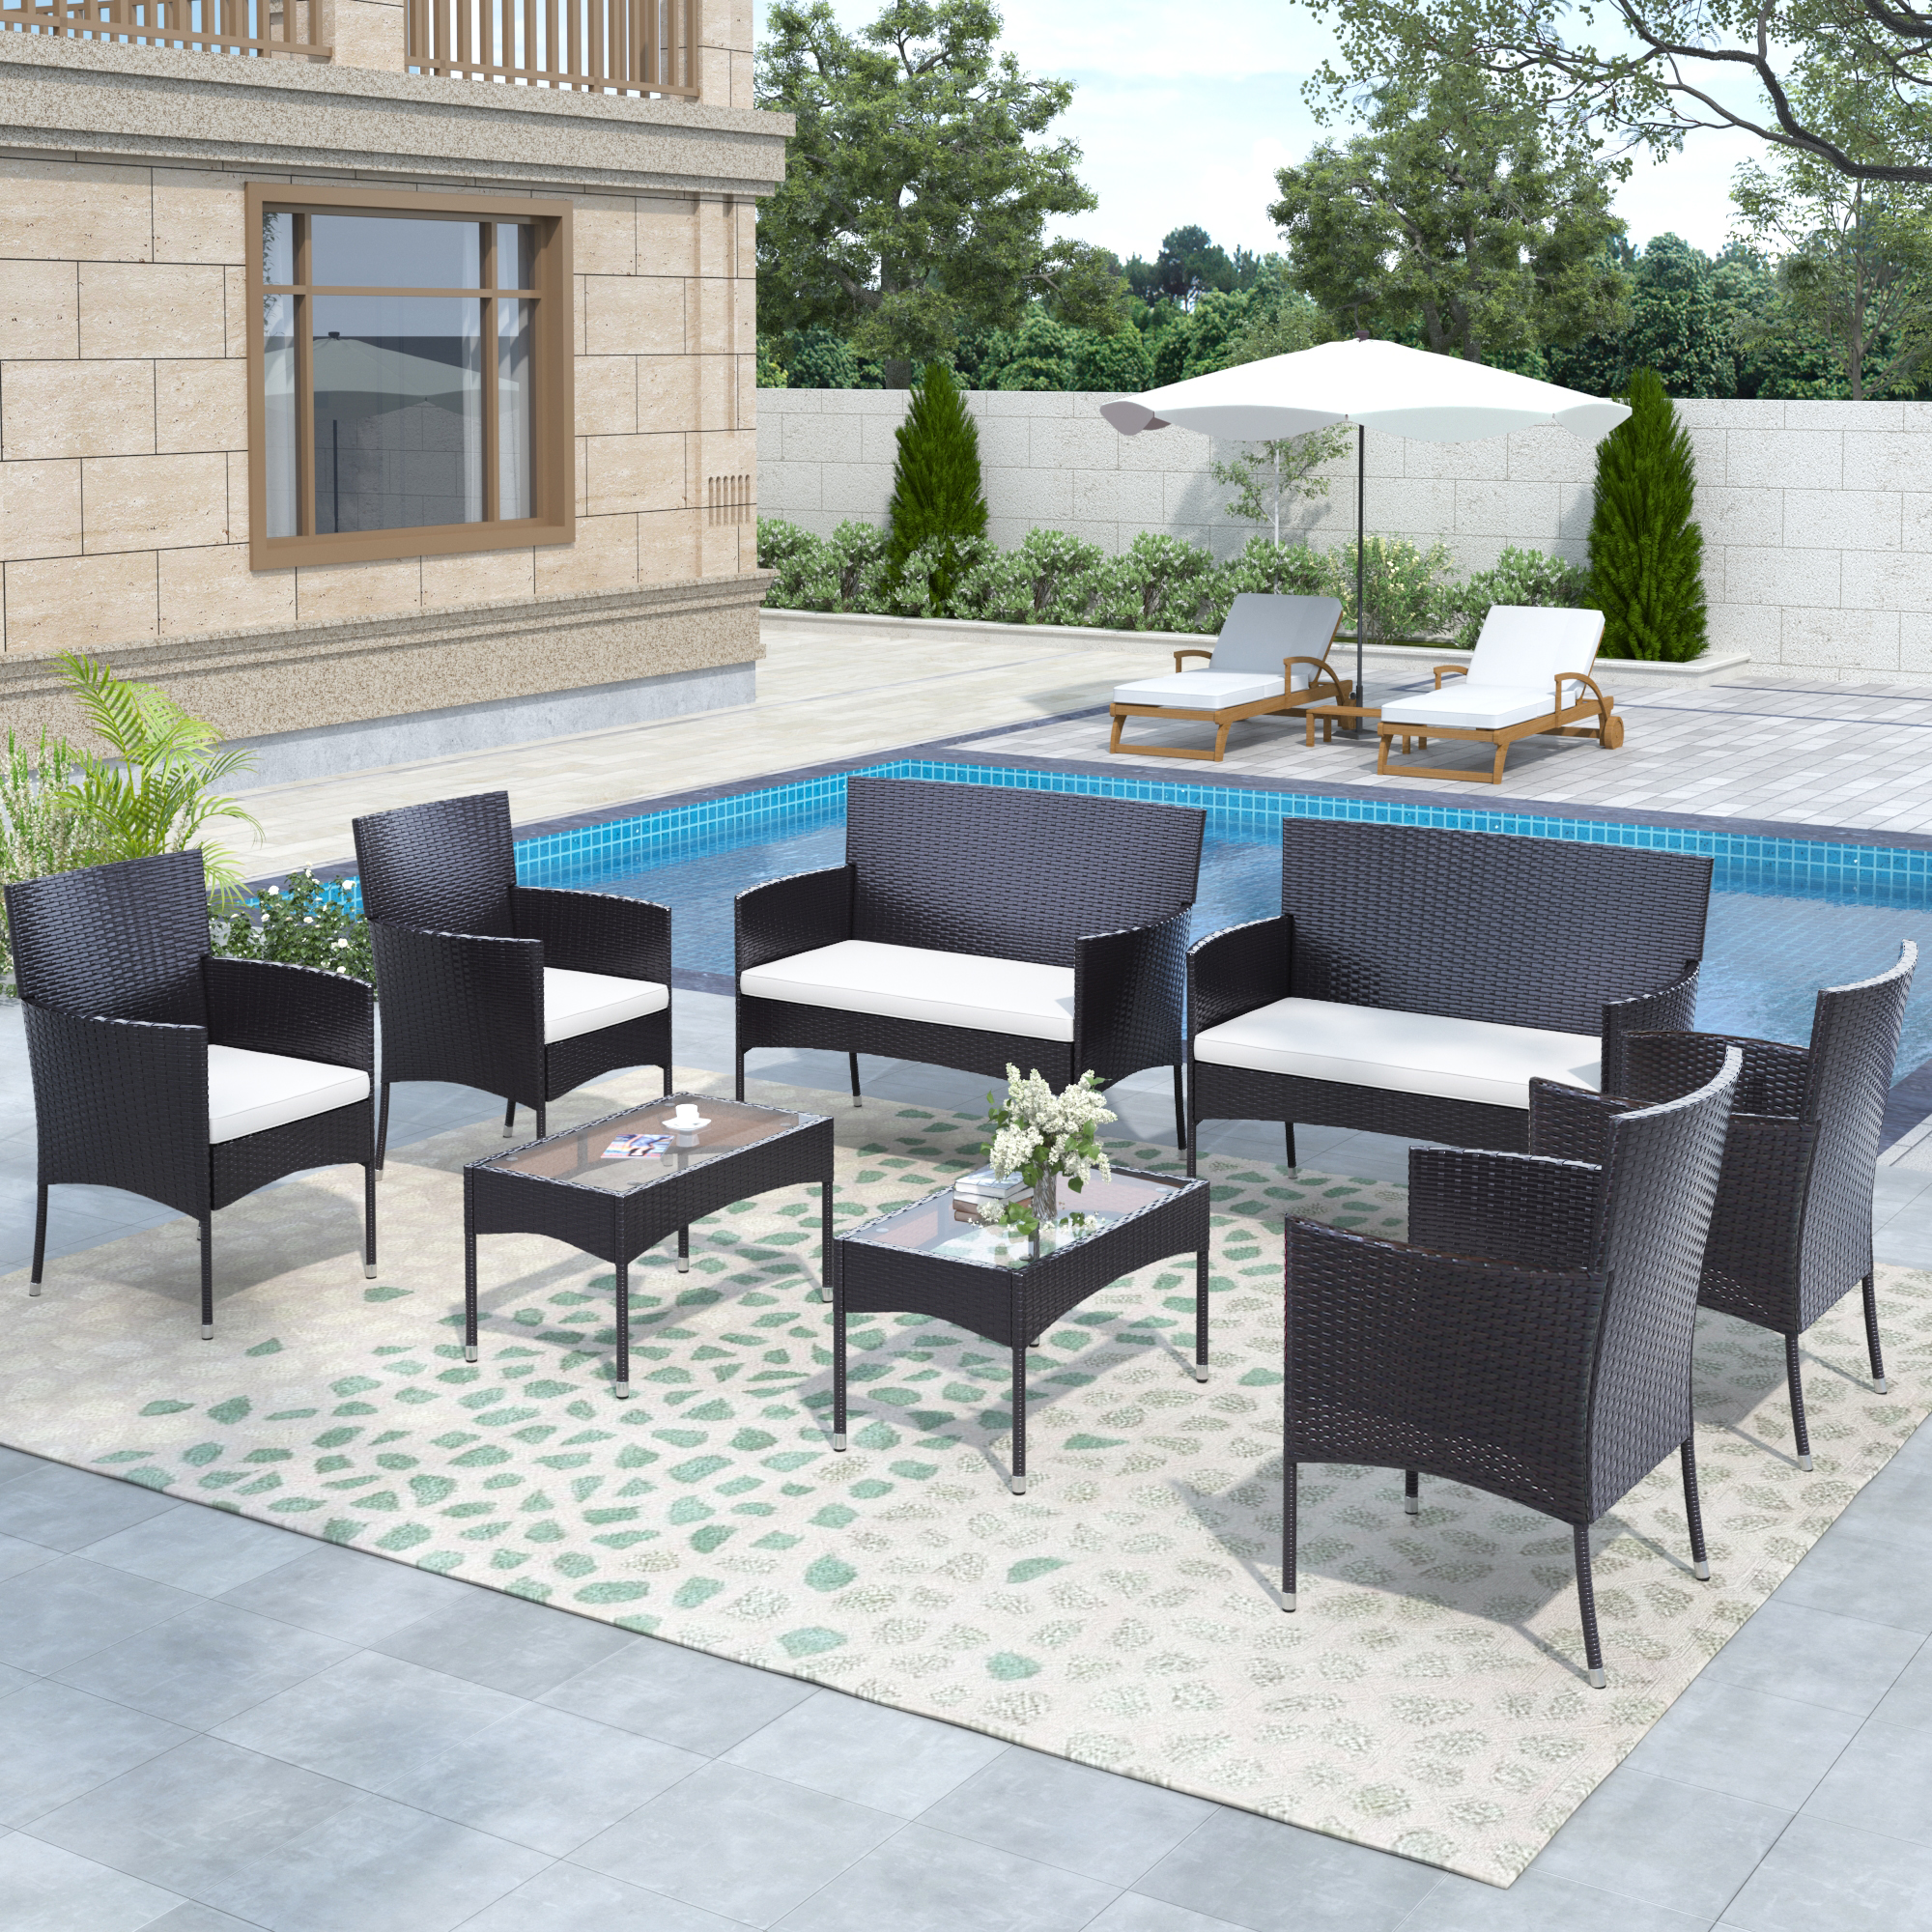 Patio Conversation Sets, 8-Piece Porch Bistro Set Outdoor Chairs with Glass Coffee Table, Deck Furniture PE Rattan Wicker Patio Set for Backyard Garden Poolside, Outdoor Wicker Chair Set, Q10767 - image 2 of 7